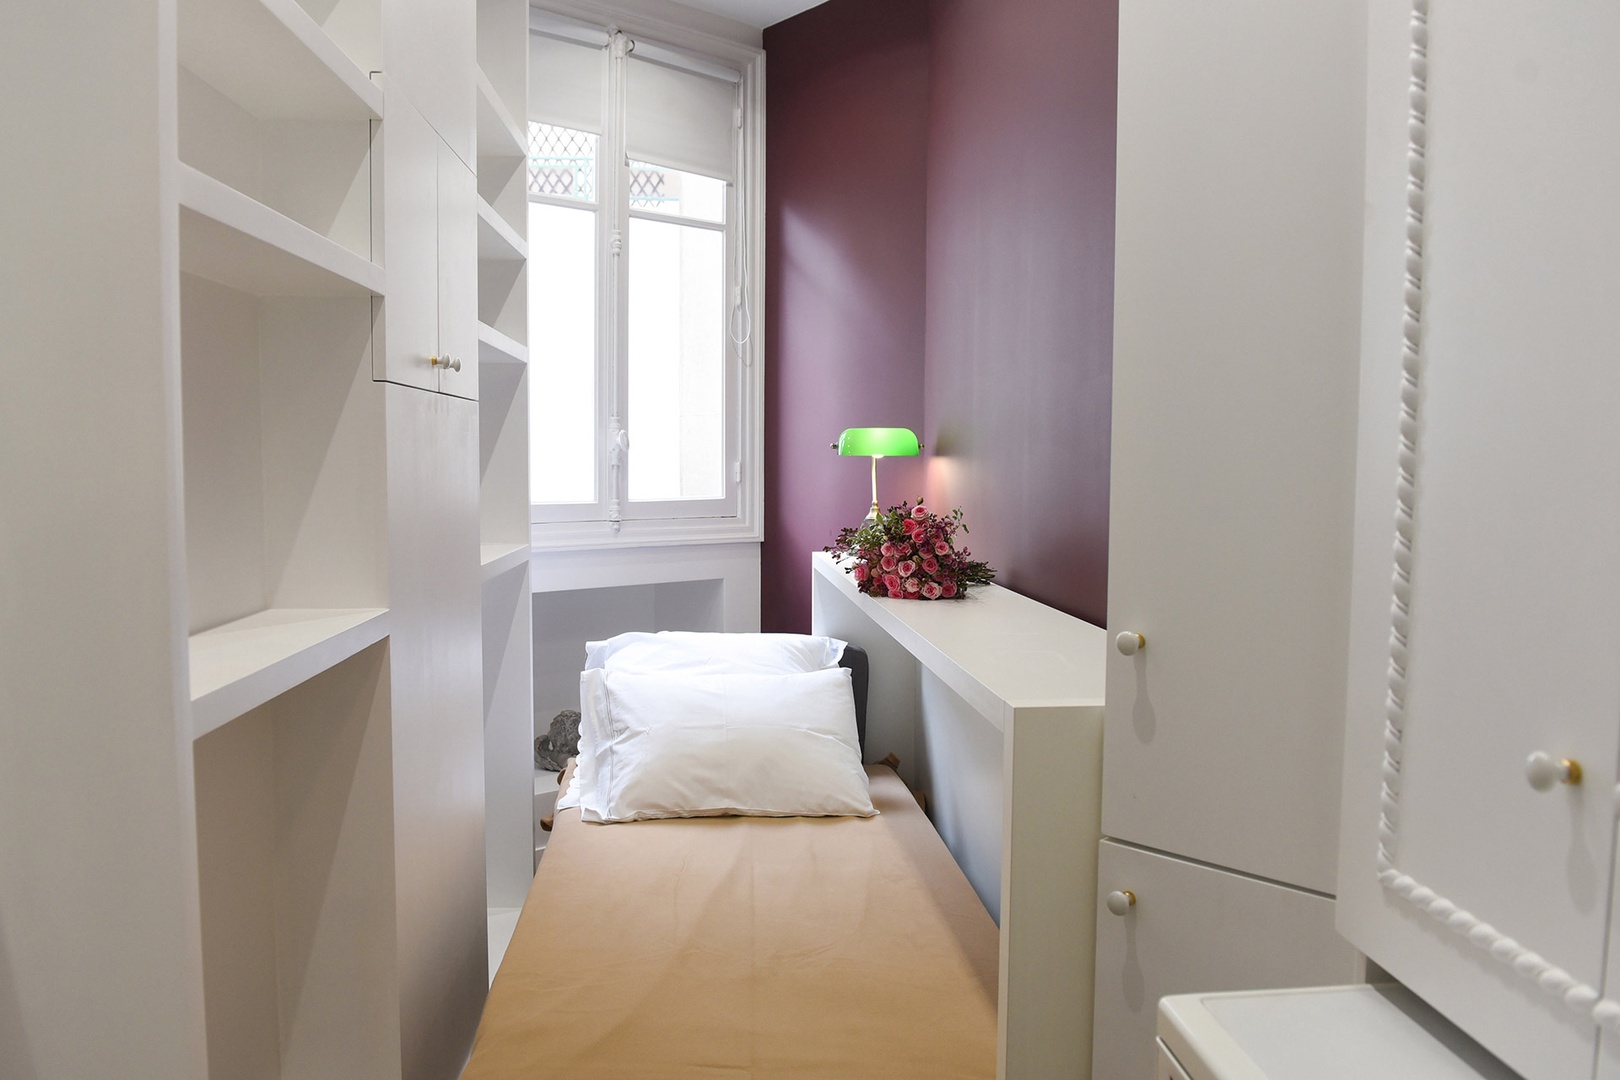 Bedroom 3 has a bed that folds open to create an extra sleeping space.